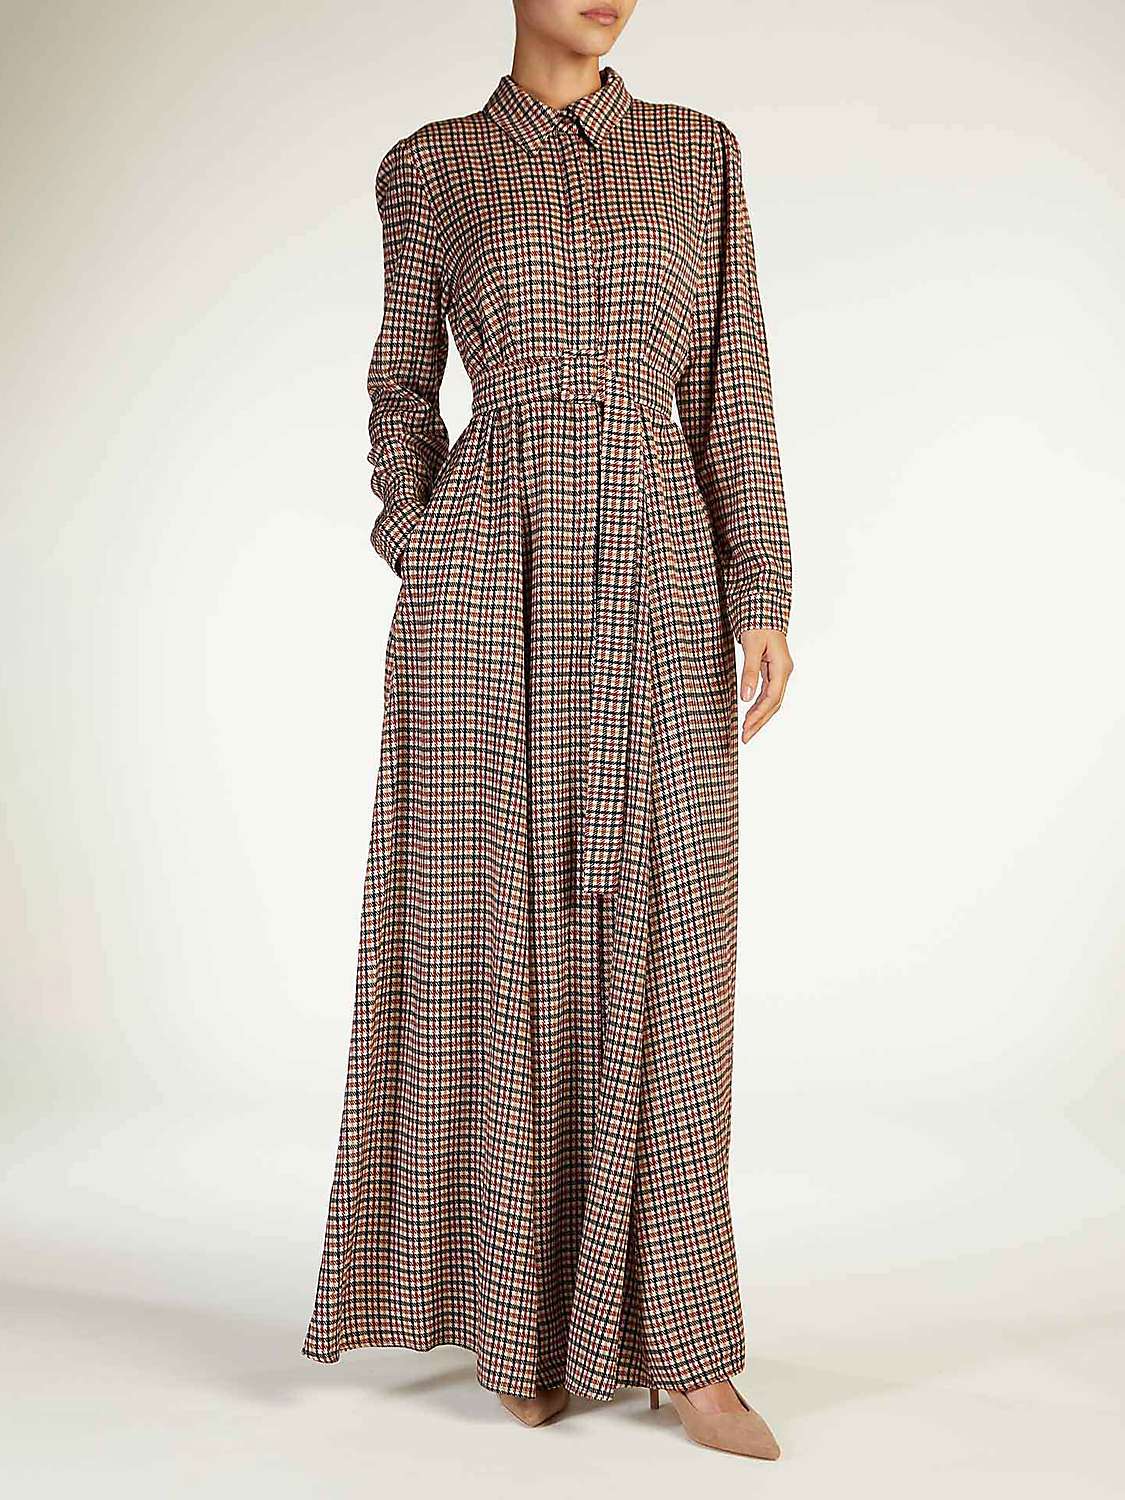 Buy Aab Mico Plaid Houndstooth Check Maxi Dress, Multi Online at johnlewis.com